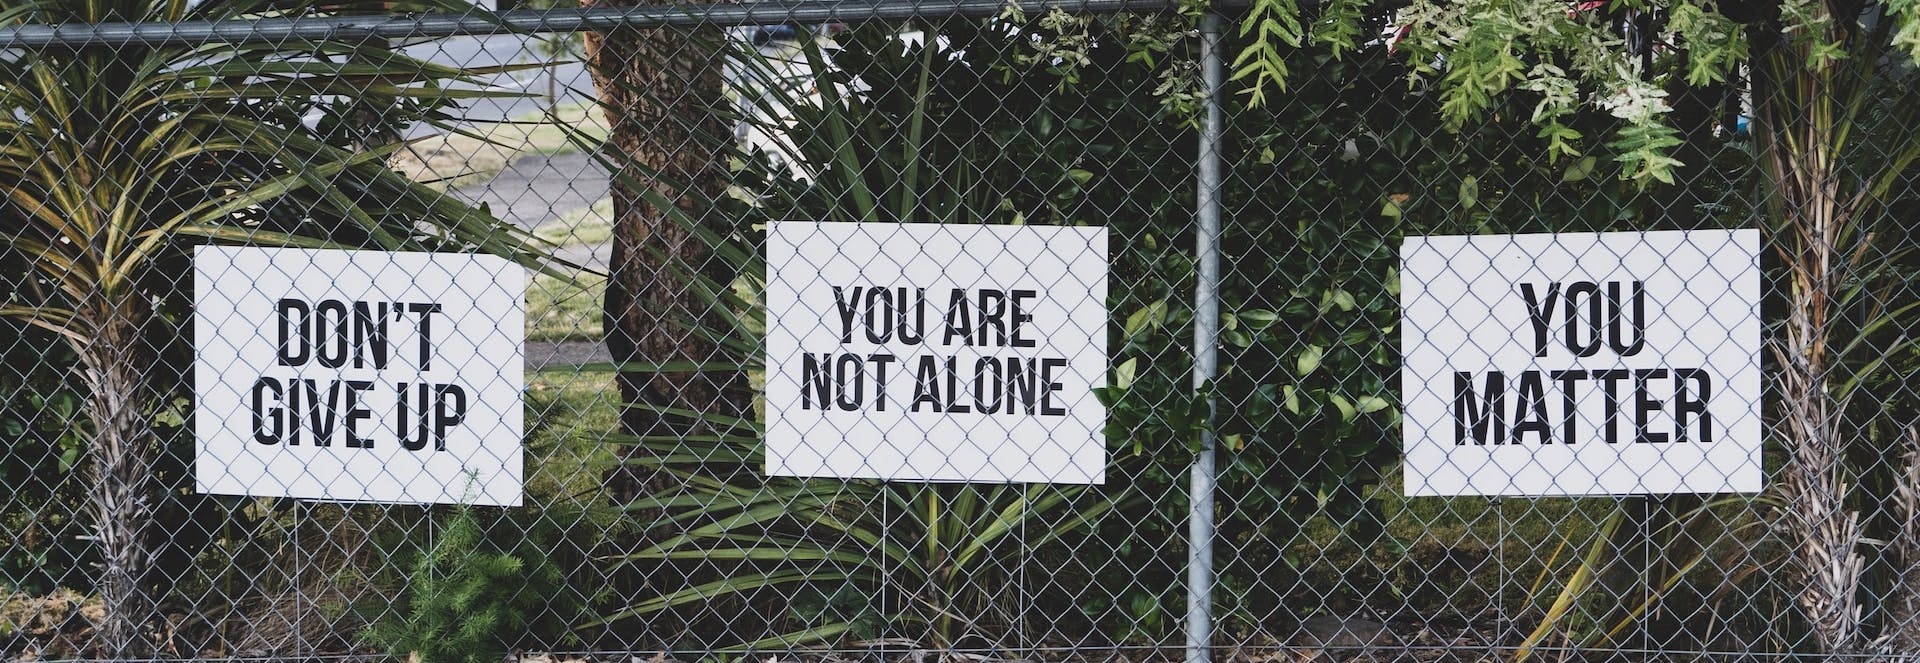 signs on fence - don't give up; you are not alone; you matter